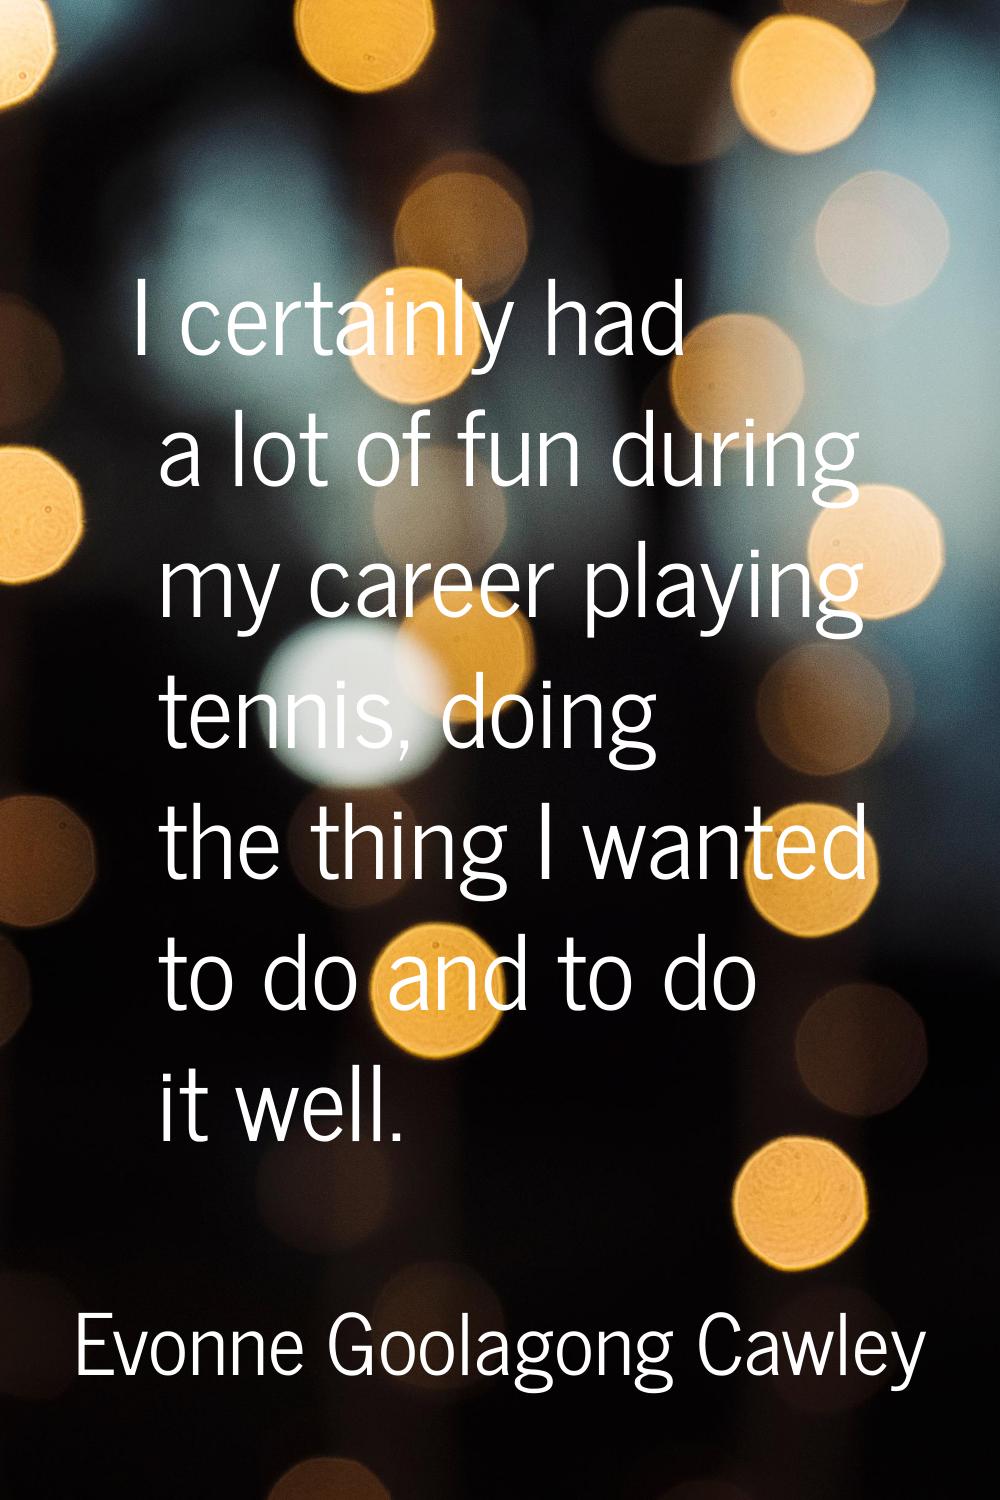 I certainly had a lot of fun during my career playing tennis, doing the thing I wanted to do and to